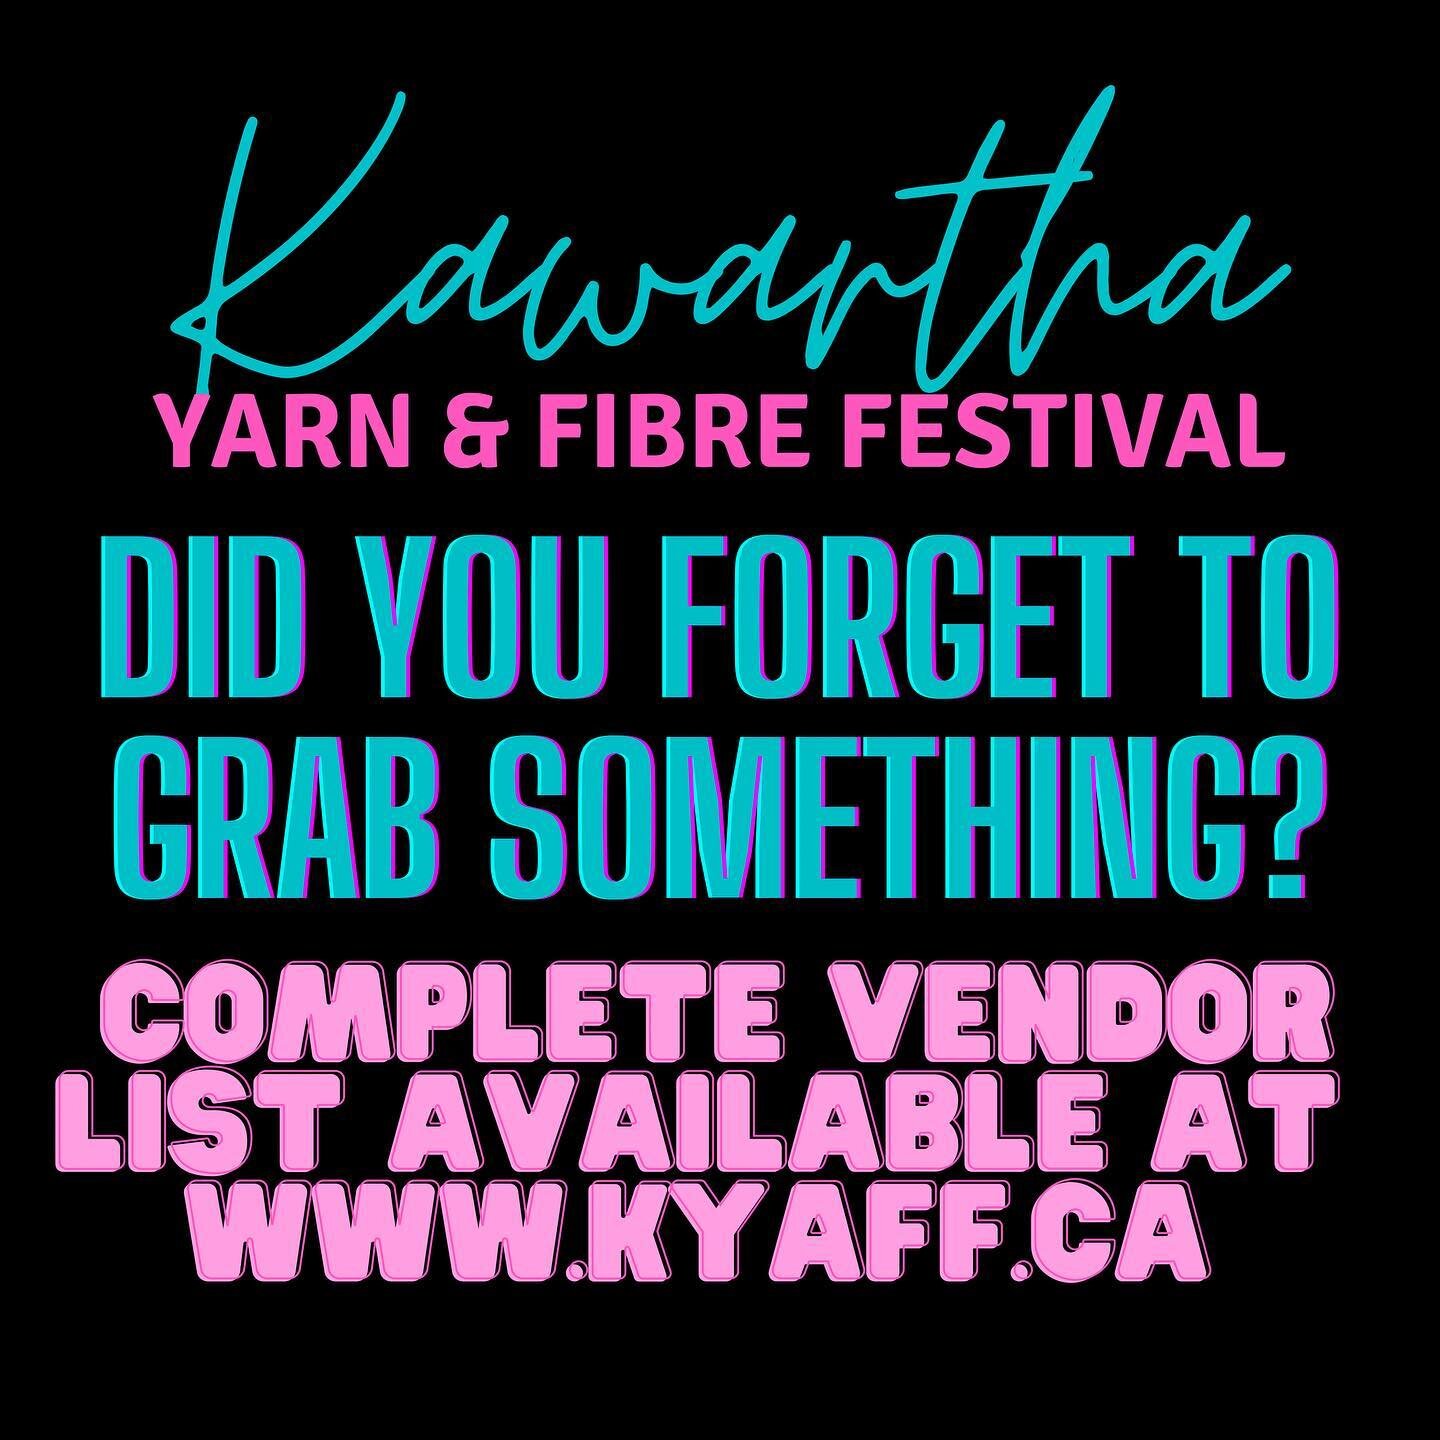 Listen, festivals are overwhelming, especially if it&rsquo;s your first time - but as experienced festival-goers let us share a tip: You can swing by our website and find the vendor you forgot to grab something from - and make an order directly! We&r